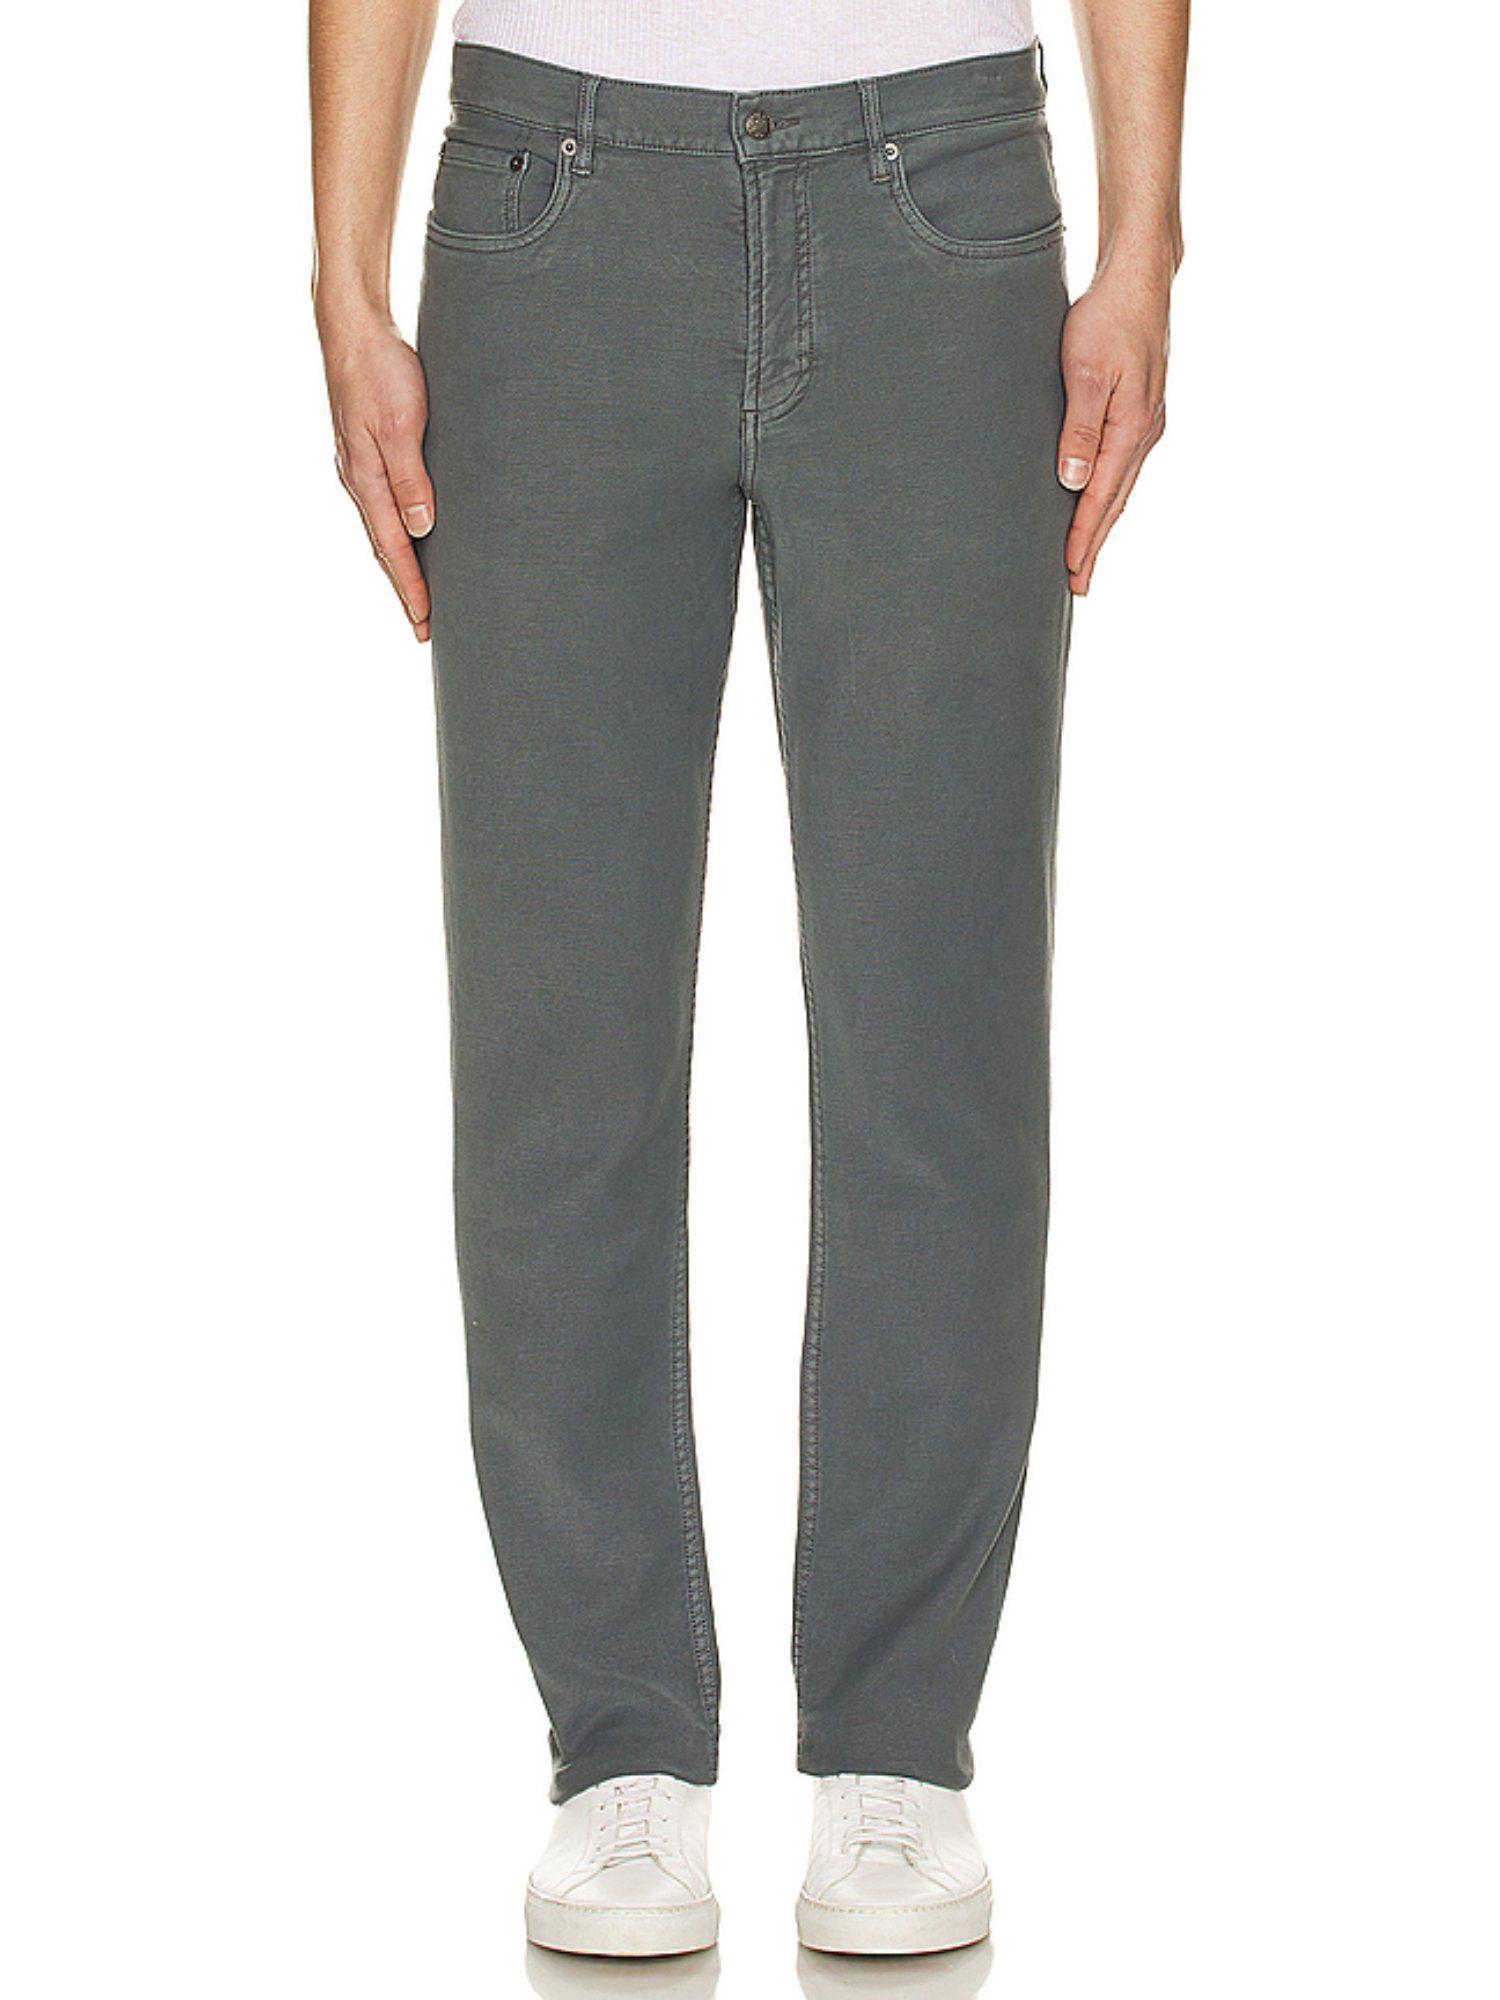 stretch terry 5 pocket pant